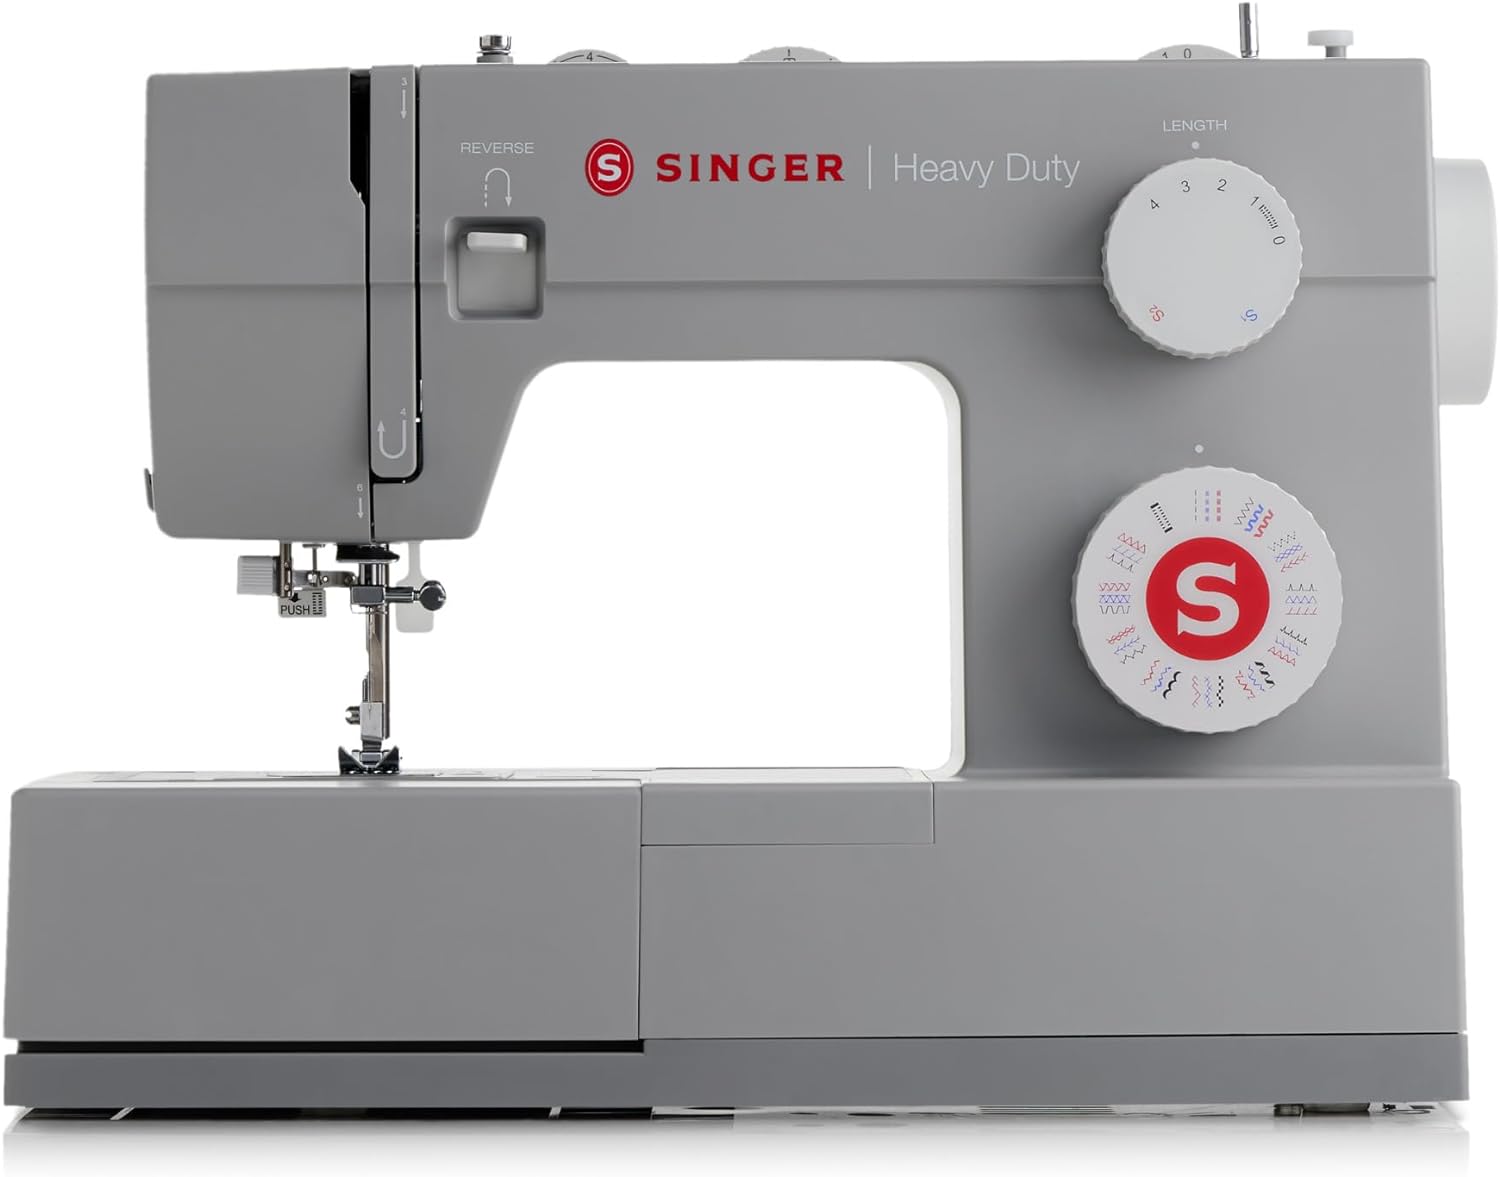 SINGER Heavy Duty 4452 Sewing Machine Gray Review